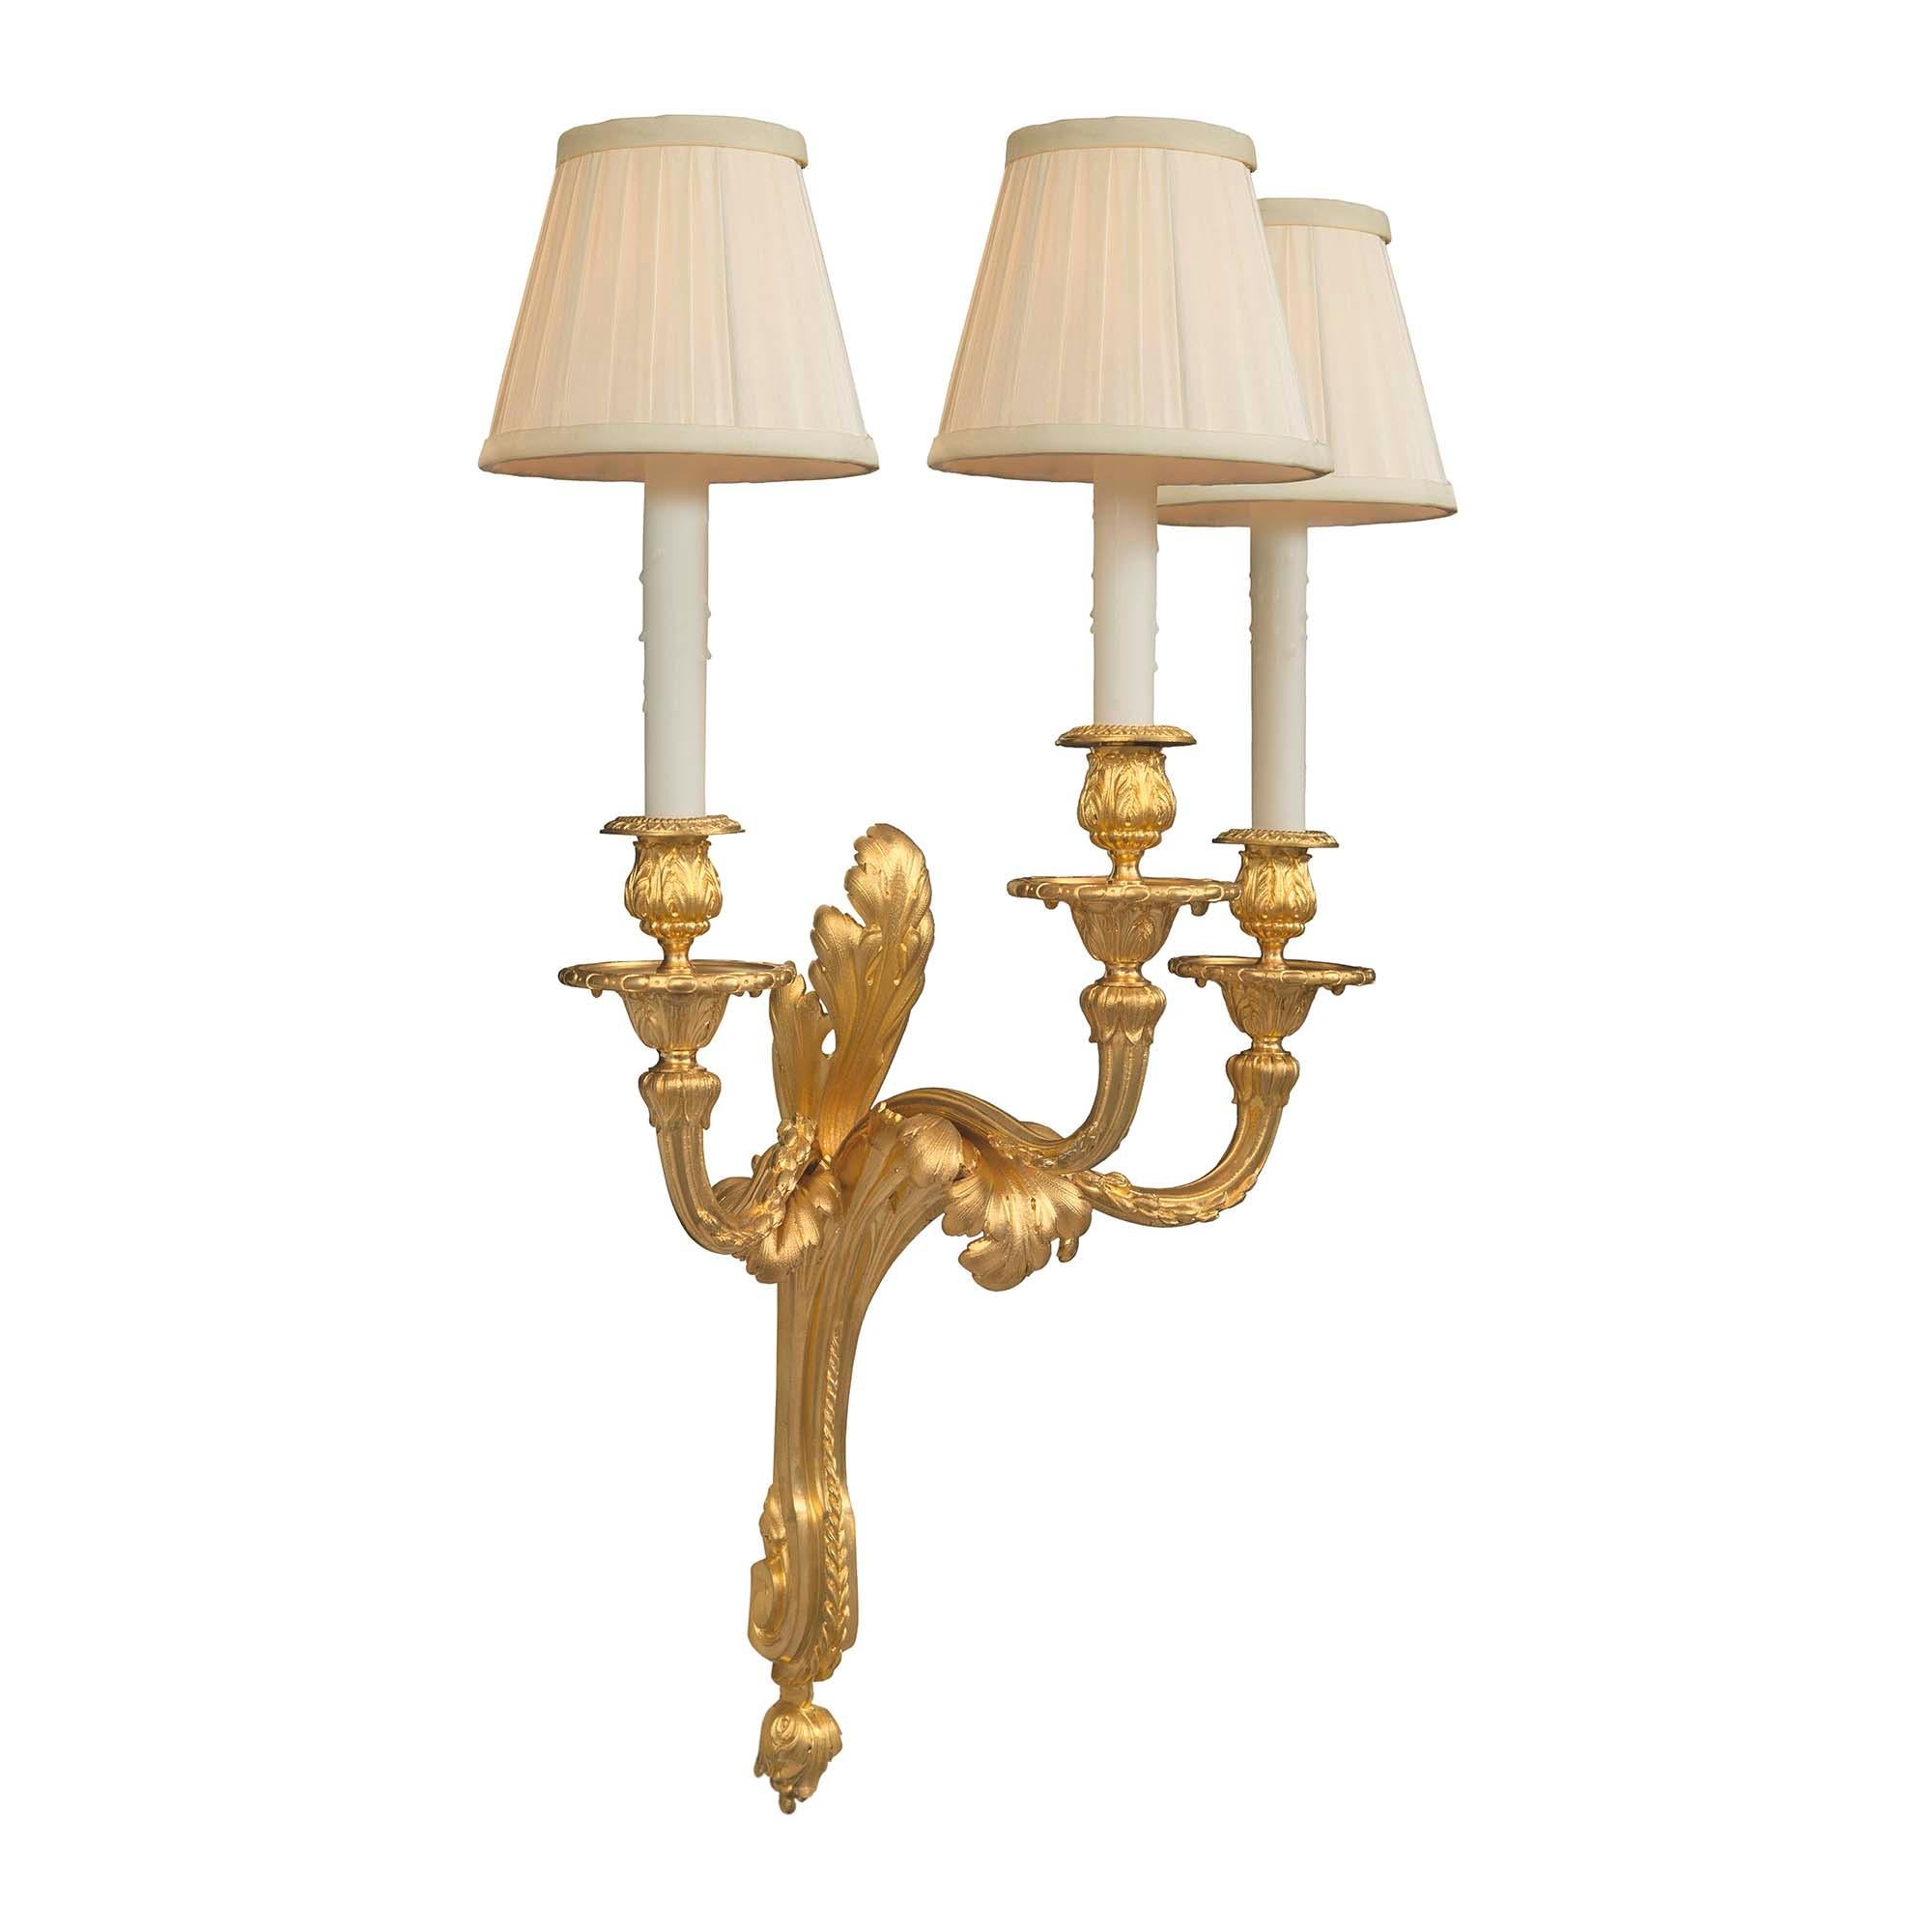 An extremely elegant and high quality pair of French 19th century Louis XVI st. ormolu three arm sconces. Each sconce is centered by a fine foliate bottom finial below the beautiful scrolled central support. The three finely scrolled arms display